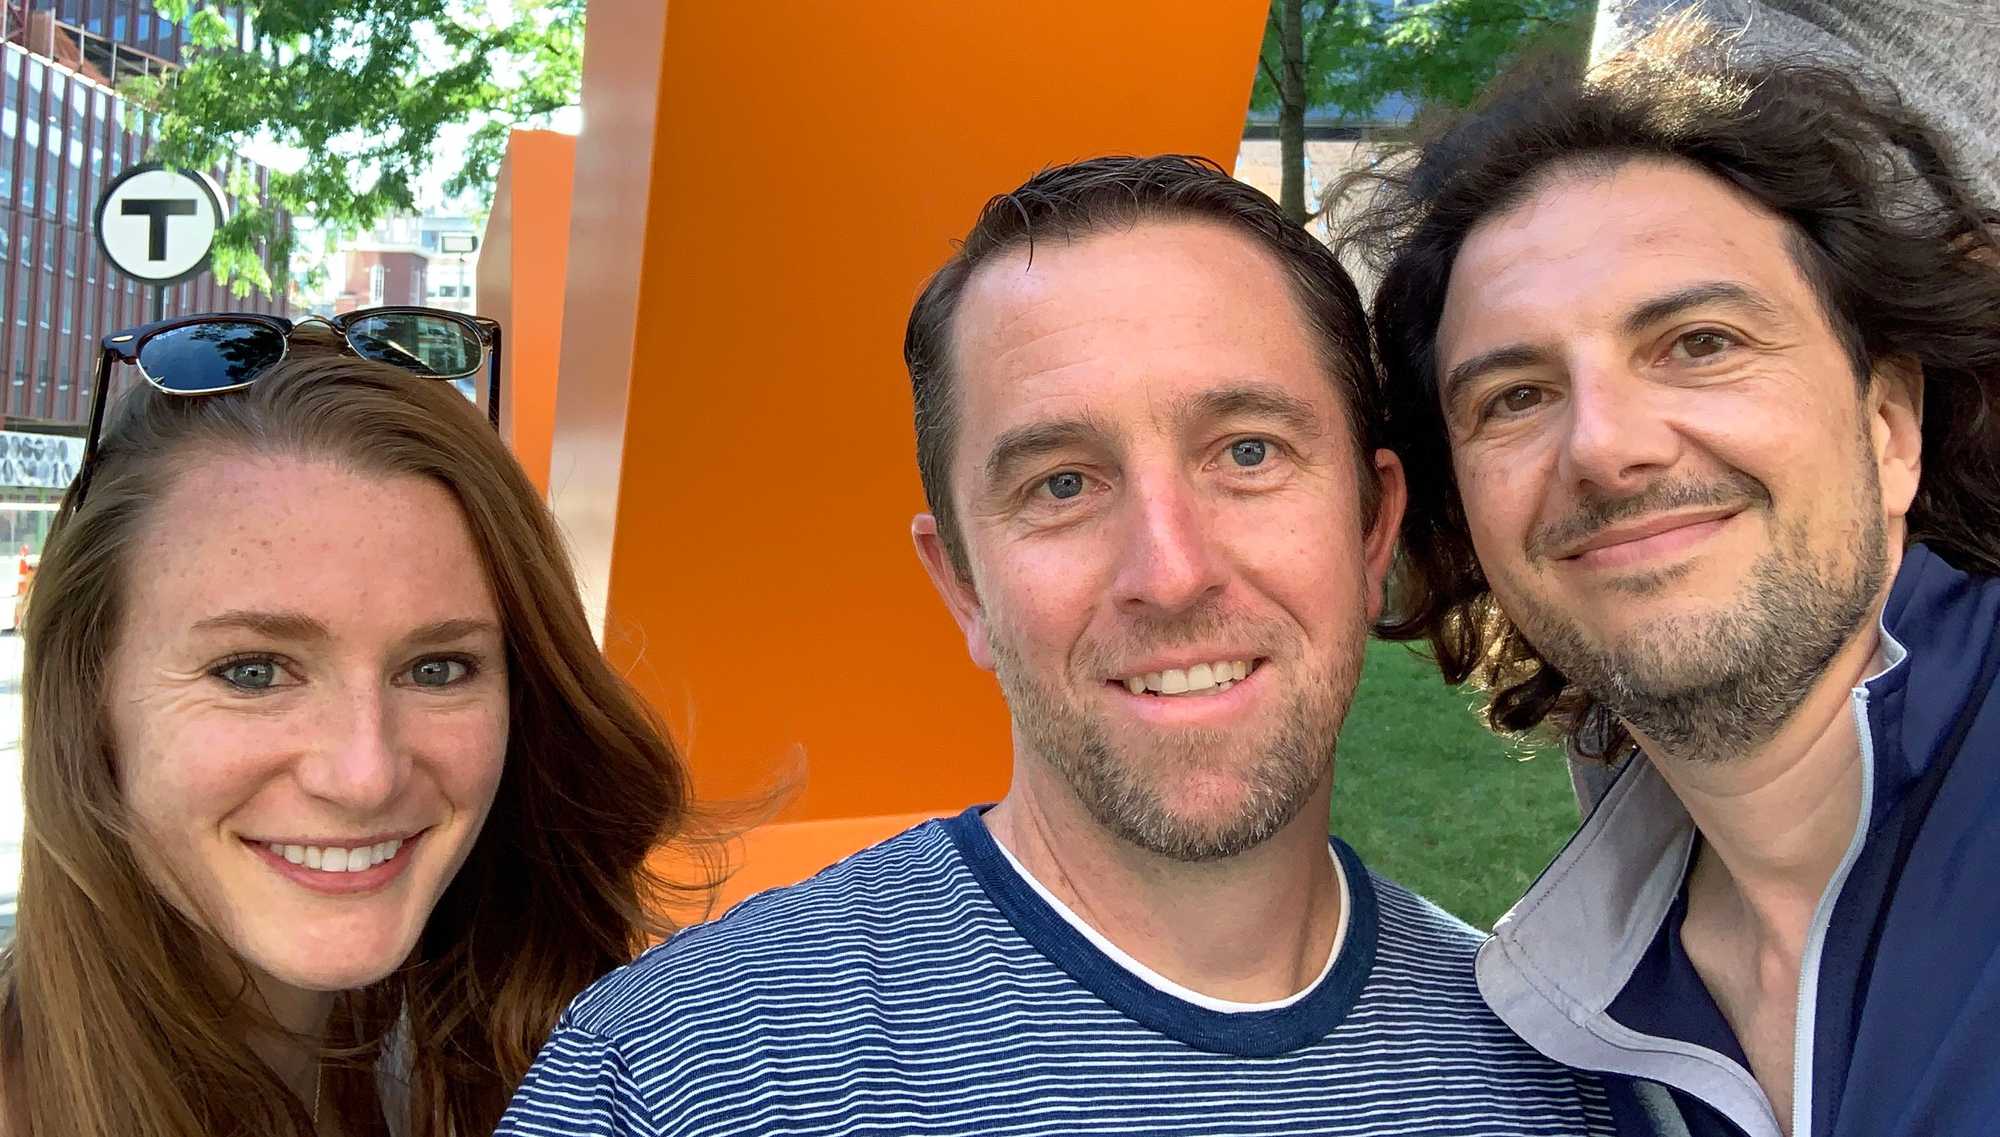 Kristin Knouse and David Sabatini (right) hanging out with a friend in 2019. 